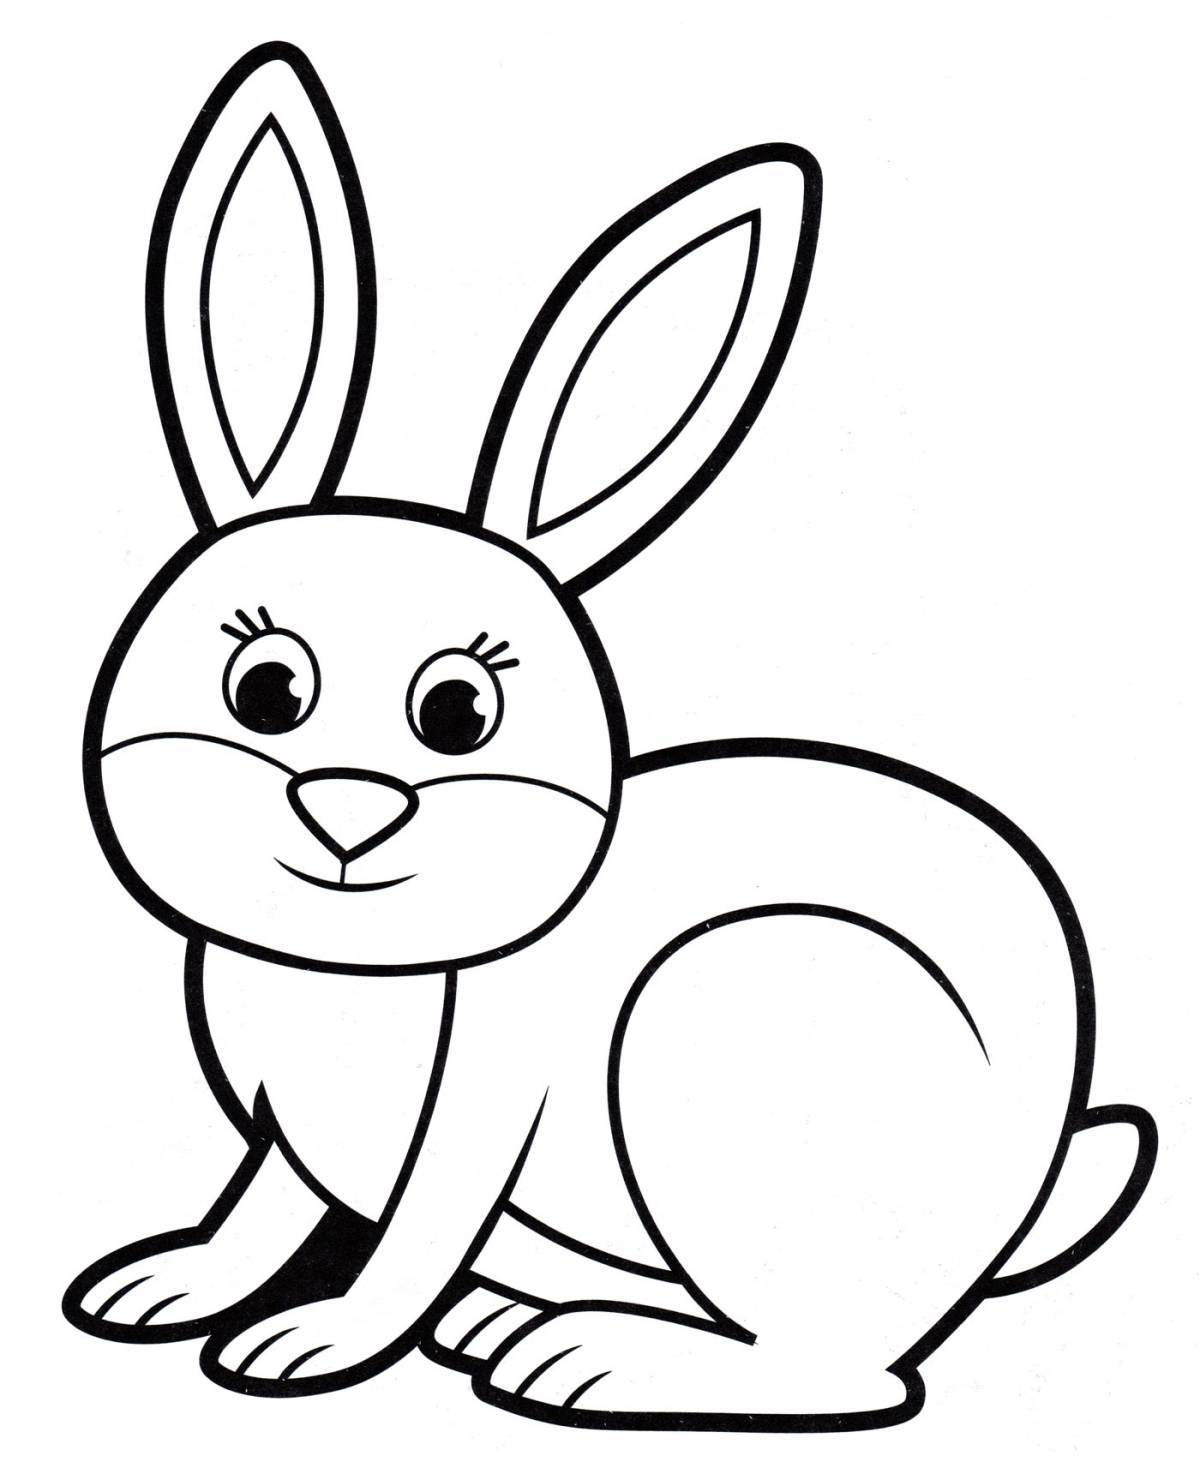 Sensational rabbit coloring book for 3-4 year olds